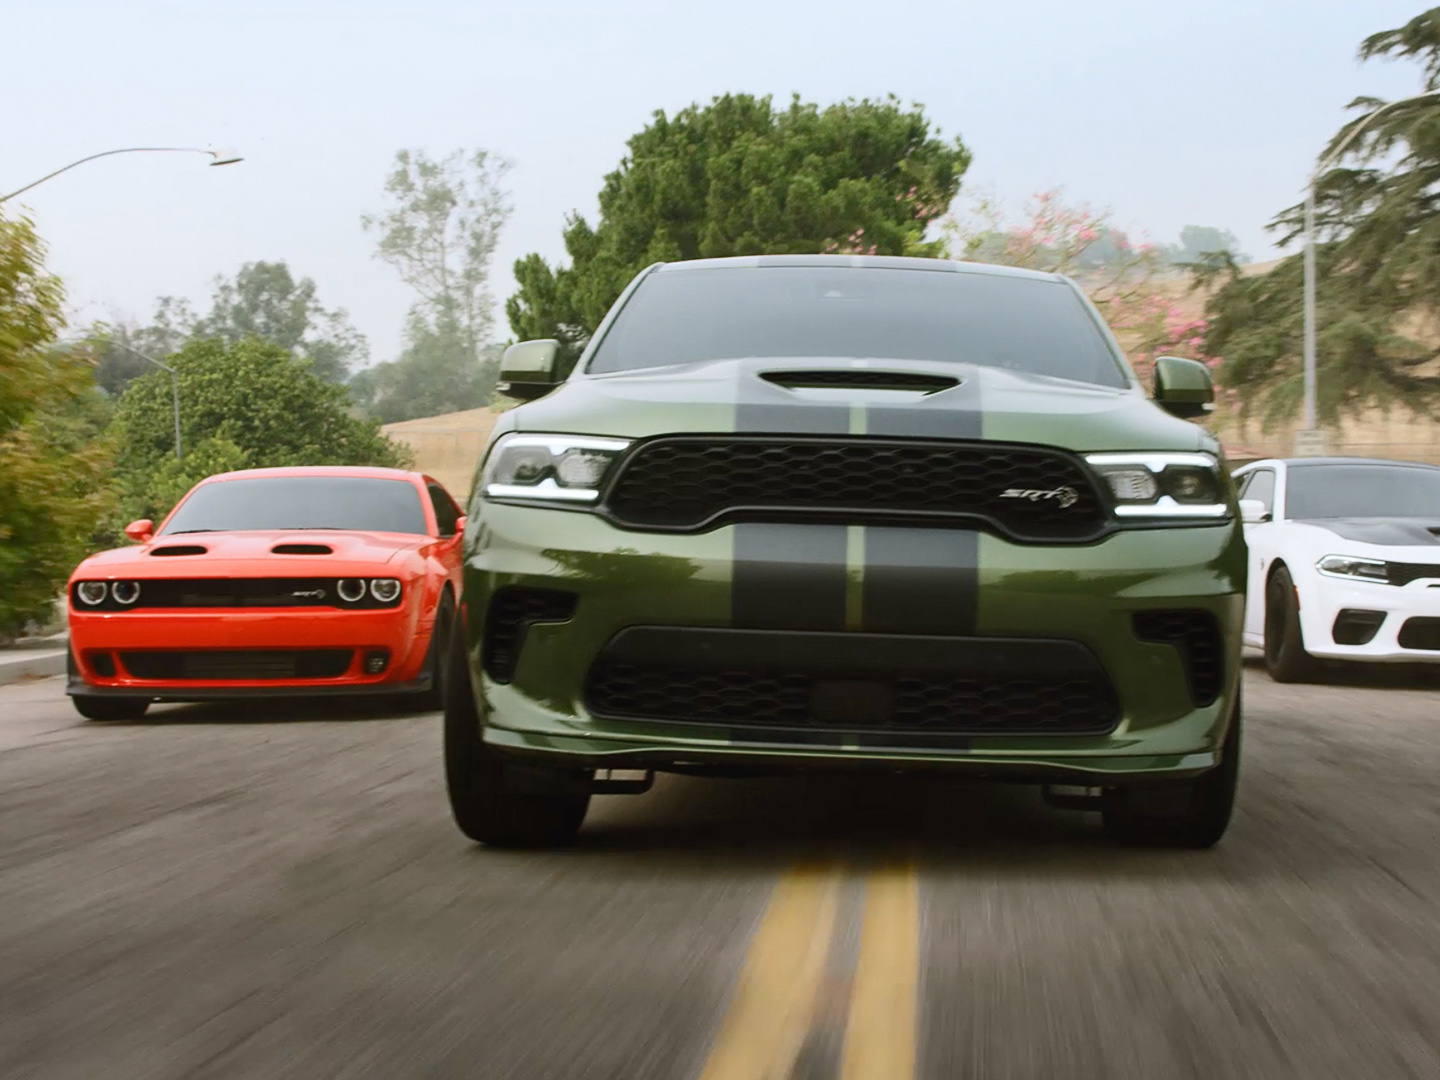 Dodge is celebrating its high-ranking J.D. Power survey results with a new commercial.